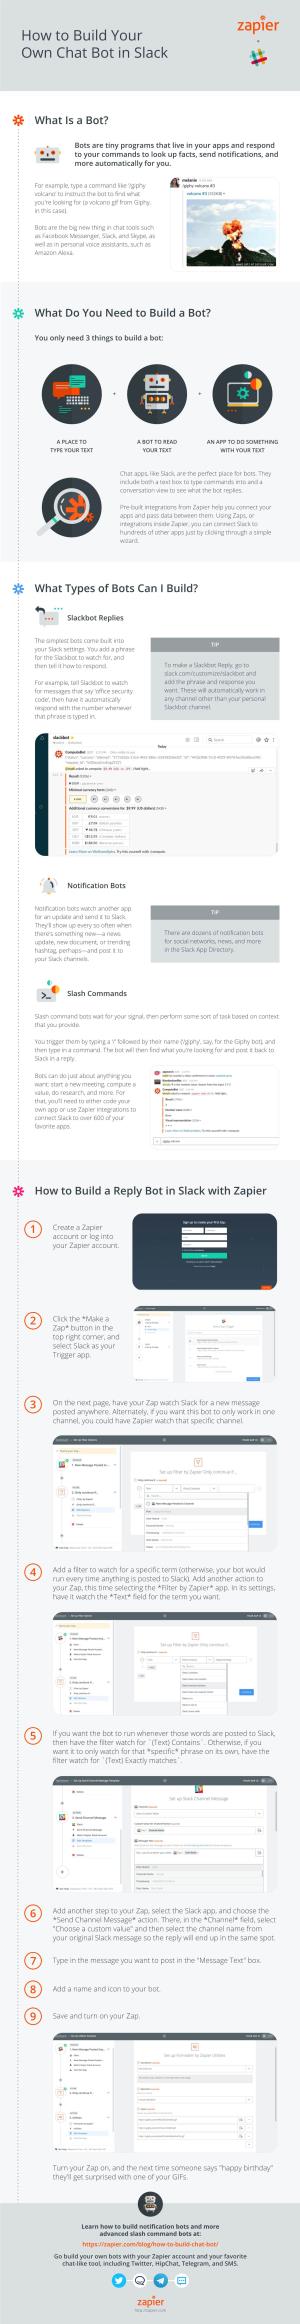 How to Build Your Own Chat Bot in Slack